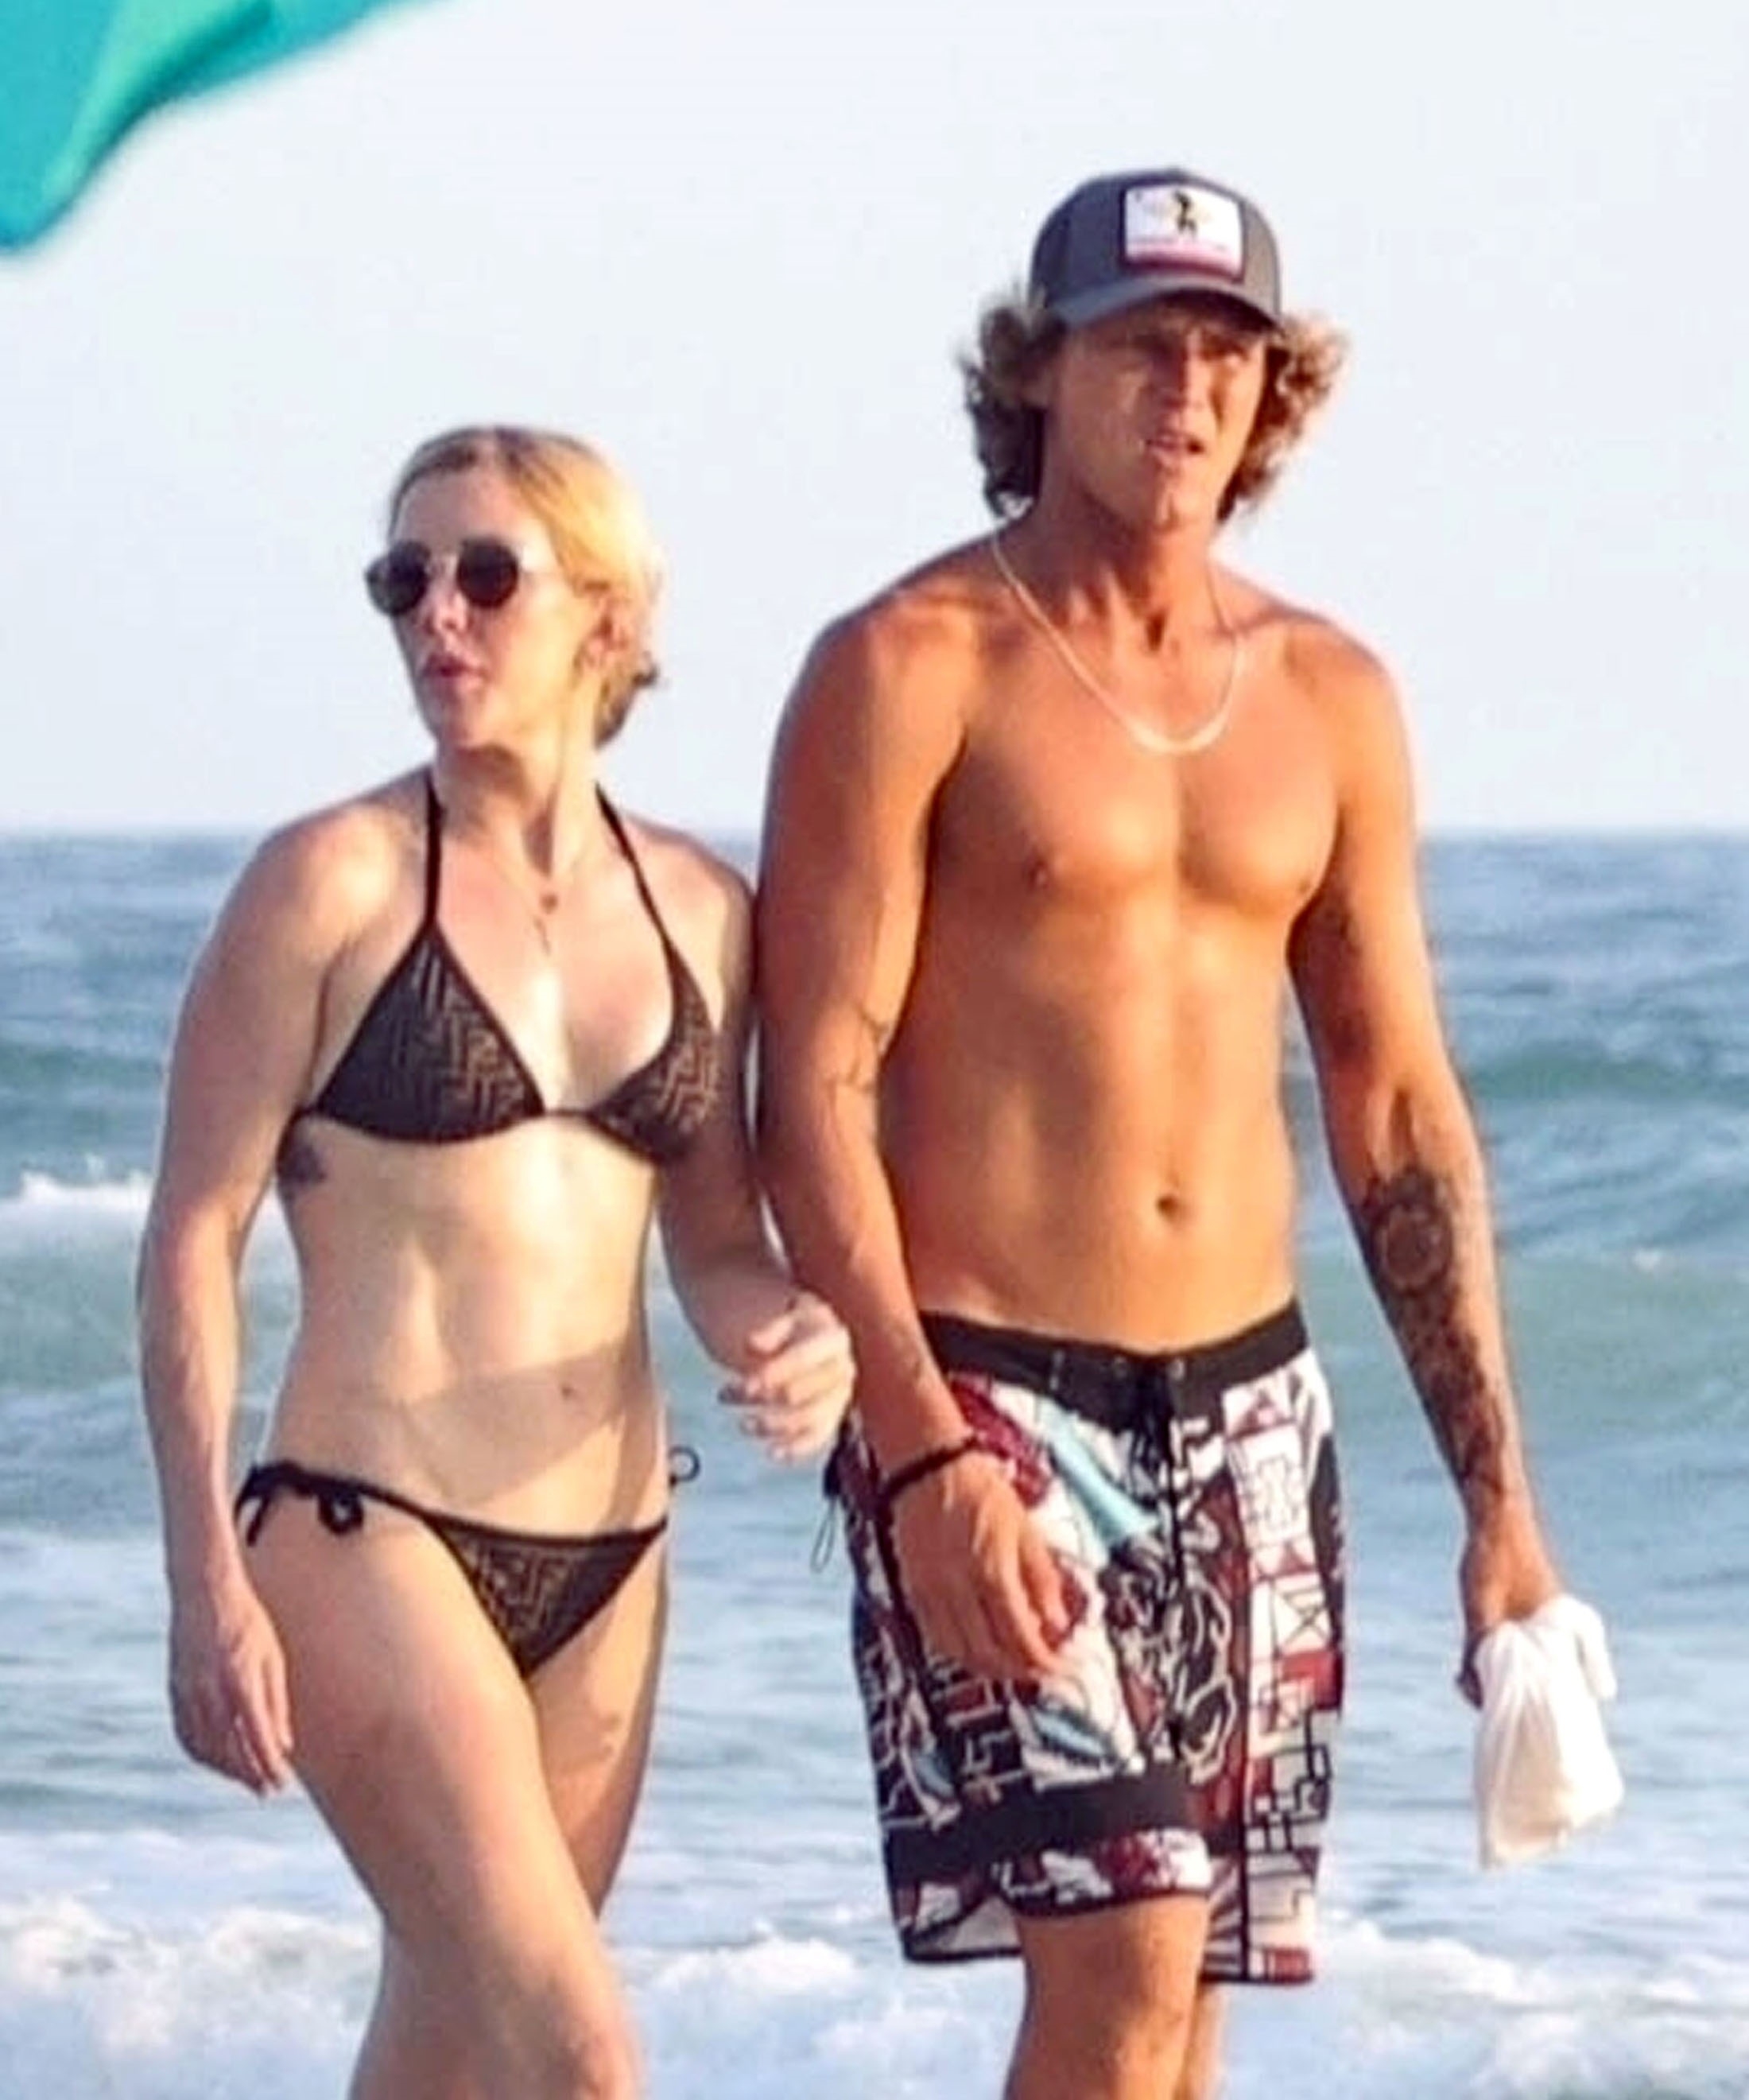 Ellie later switched to a black bikini and sunglasses